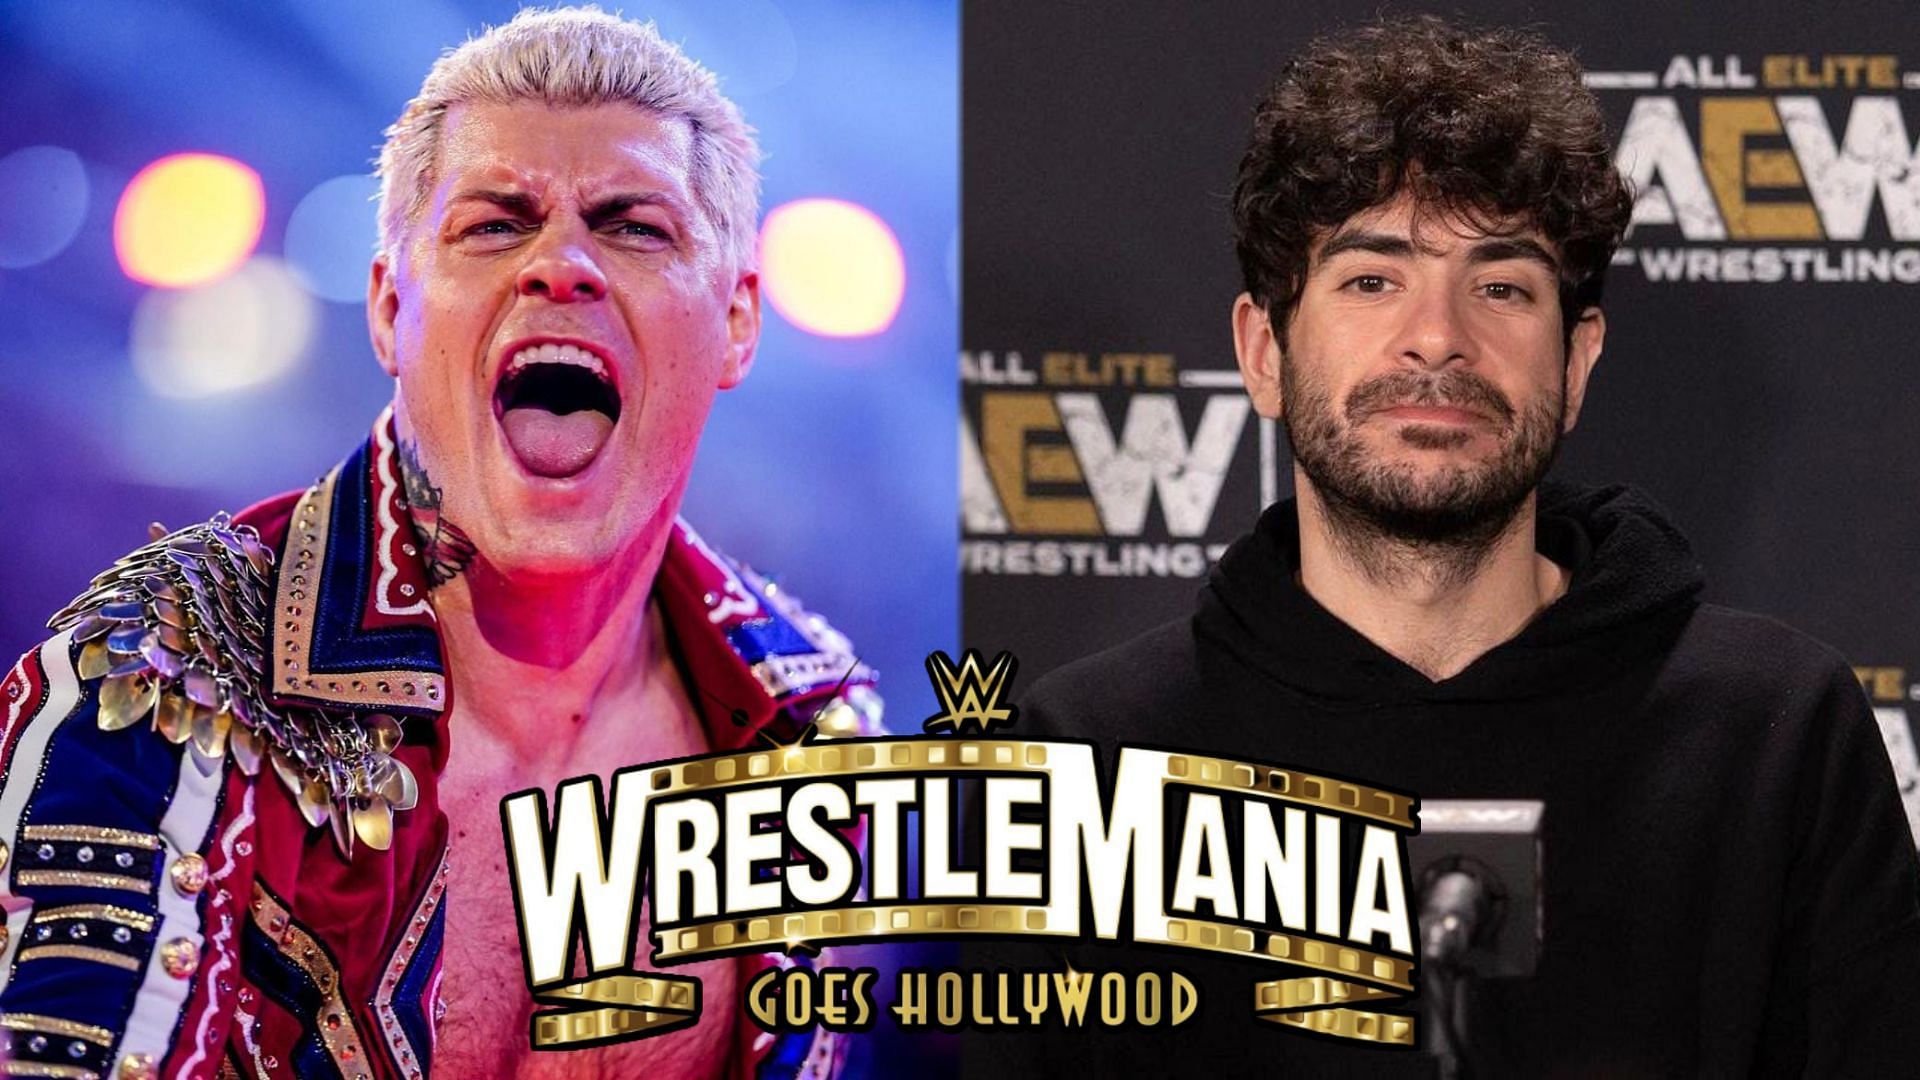 In what ways have Cody Rhodes and Tony Khan affected AEW this week?